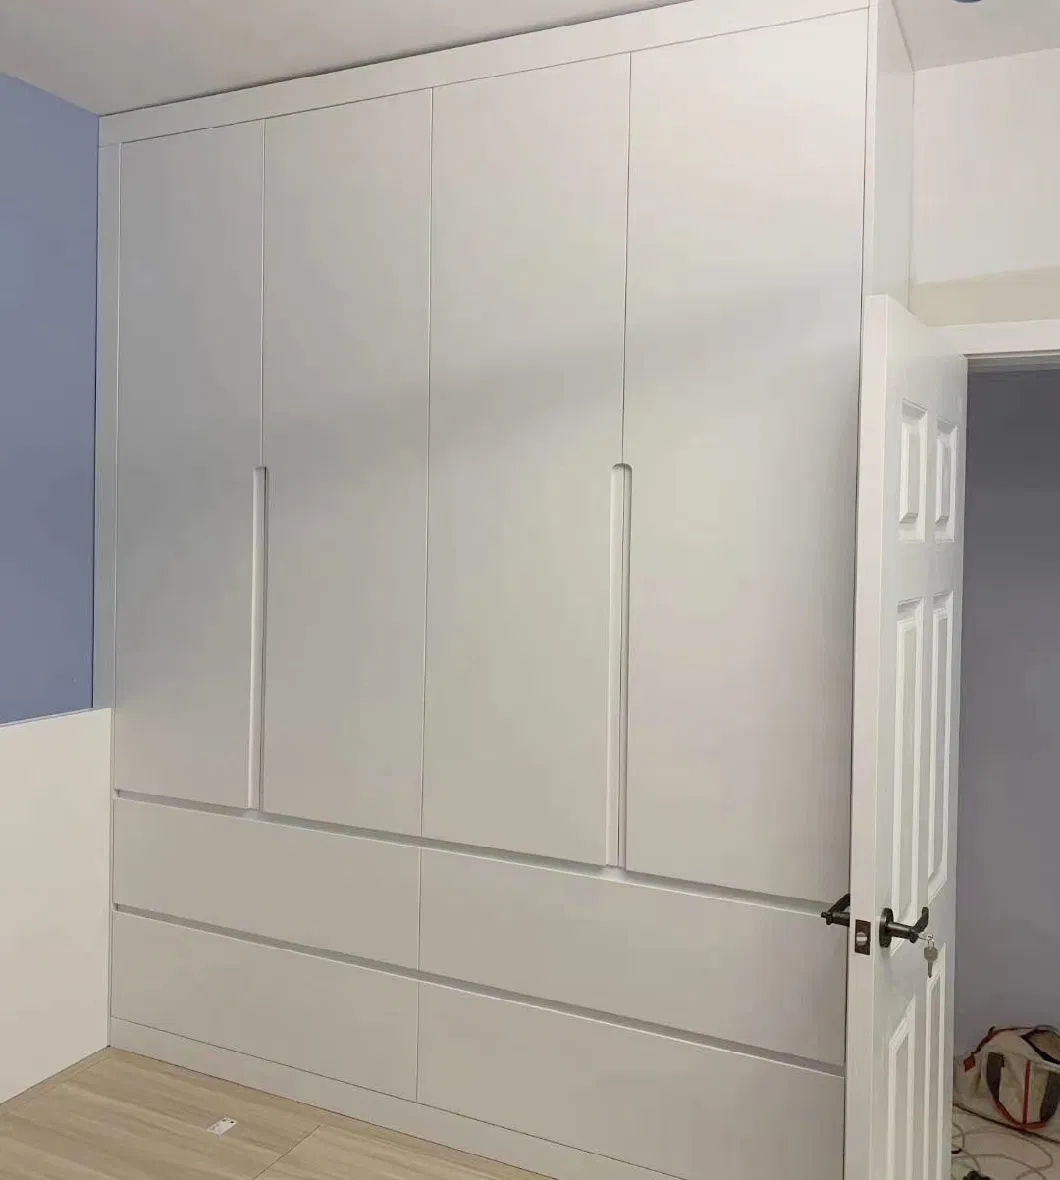 Customized Bedroom Furniture, Overall Wardrobecustomized Solutions for Modern Furniture Cloakroom, Melamine Finish, Pet Door Panels, Painted Door Panels, Multi-